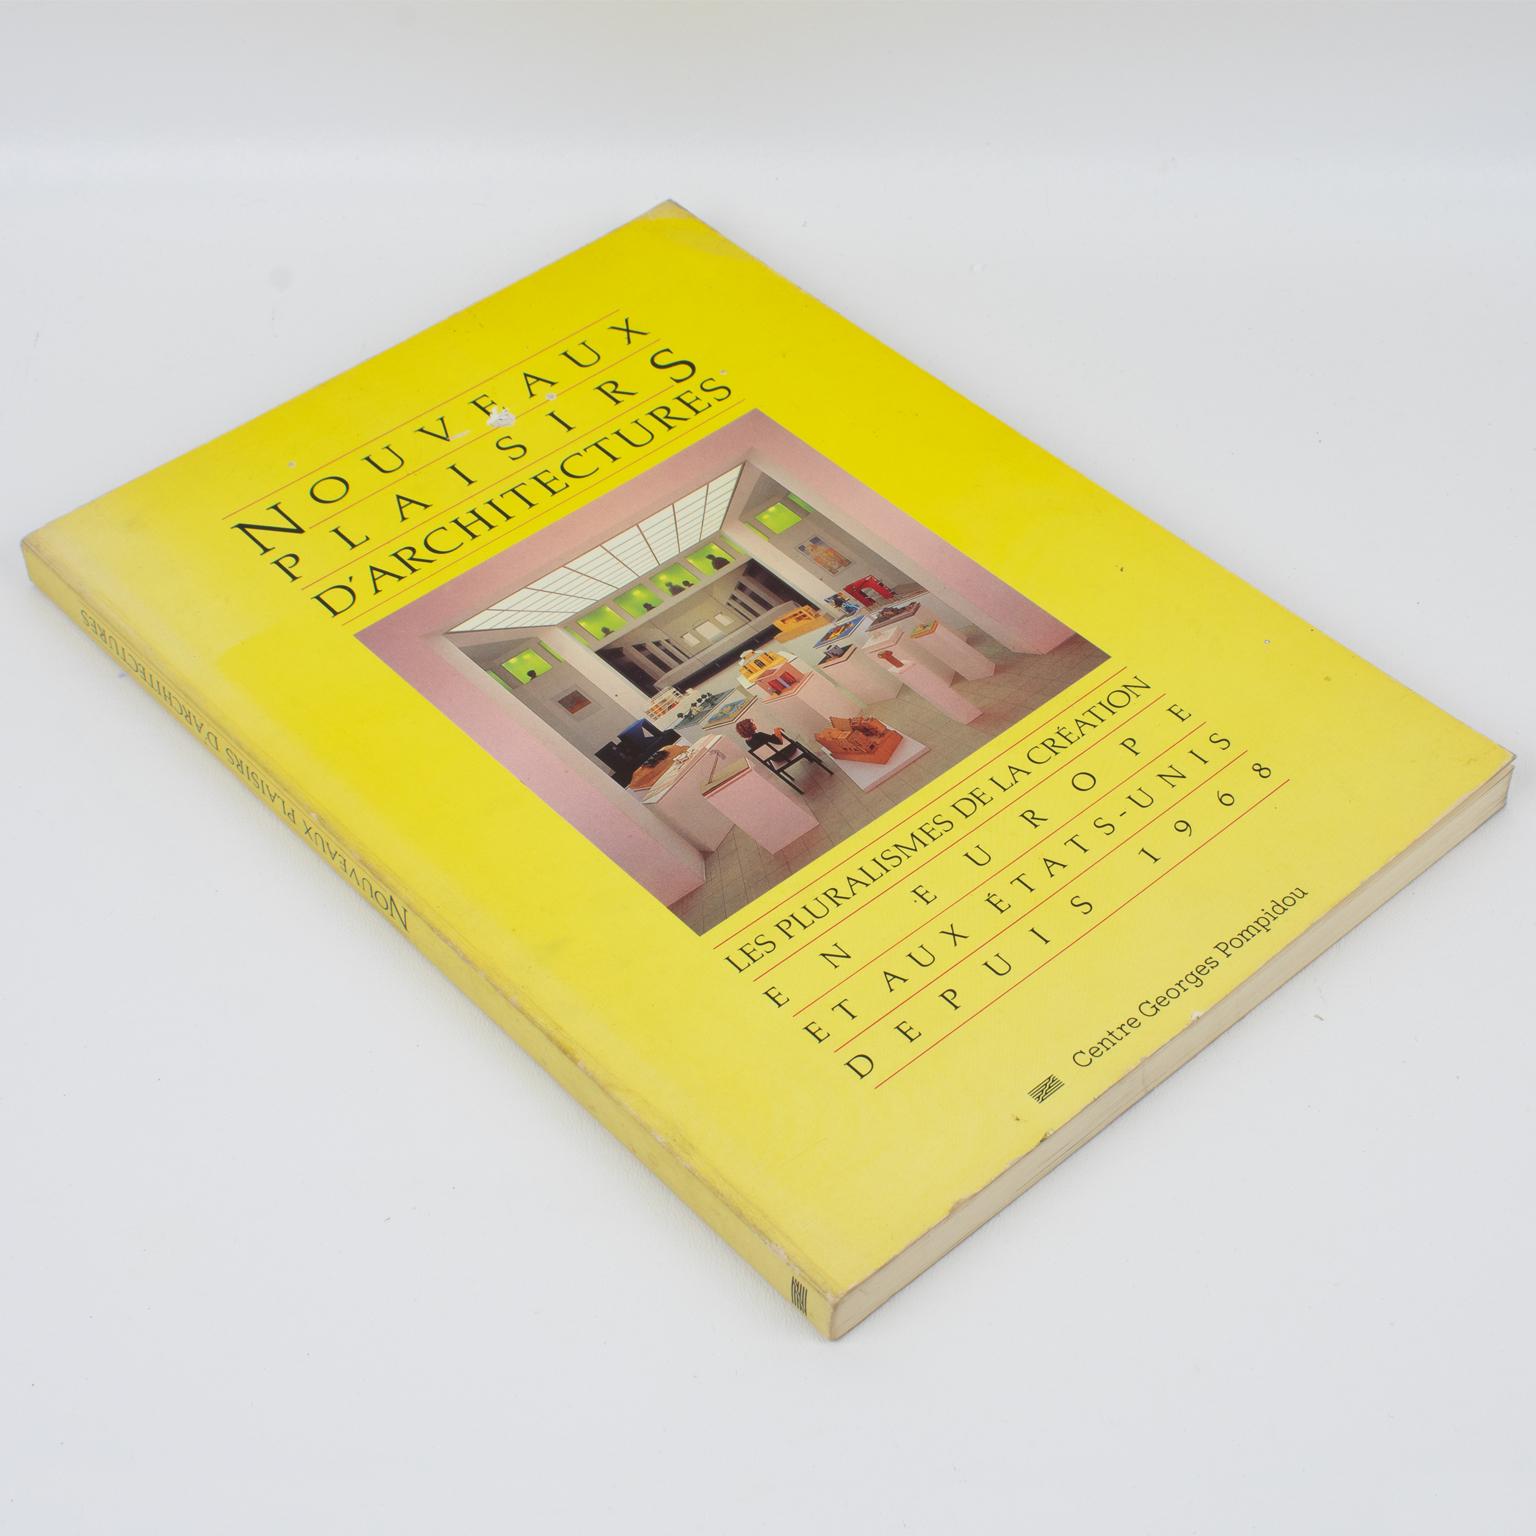 Modern New Architectural Pleasures, French Book by George Pompidou Art Center, 1985 For Sale